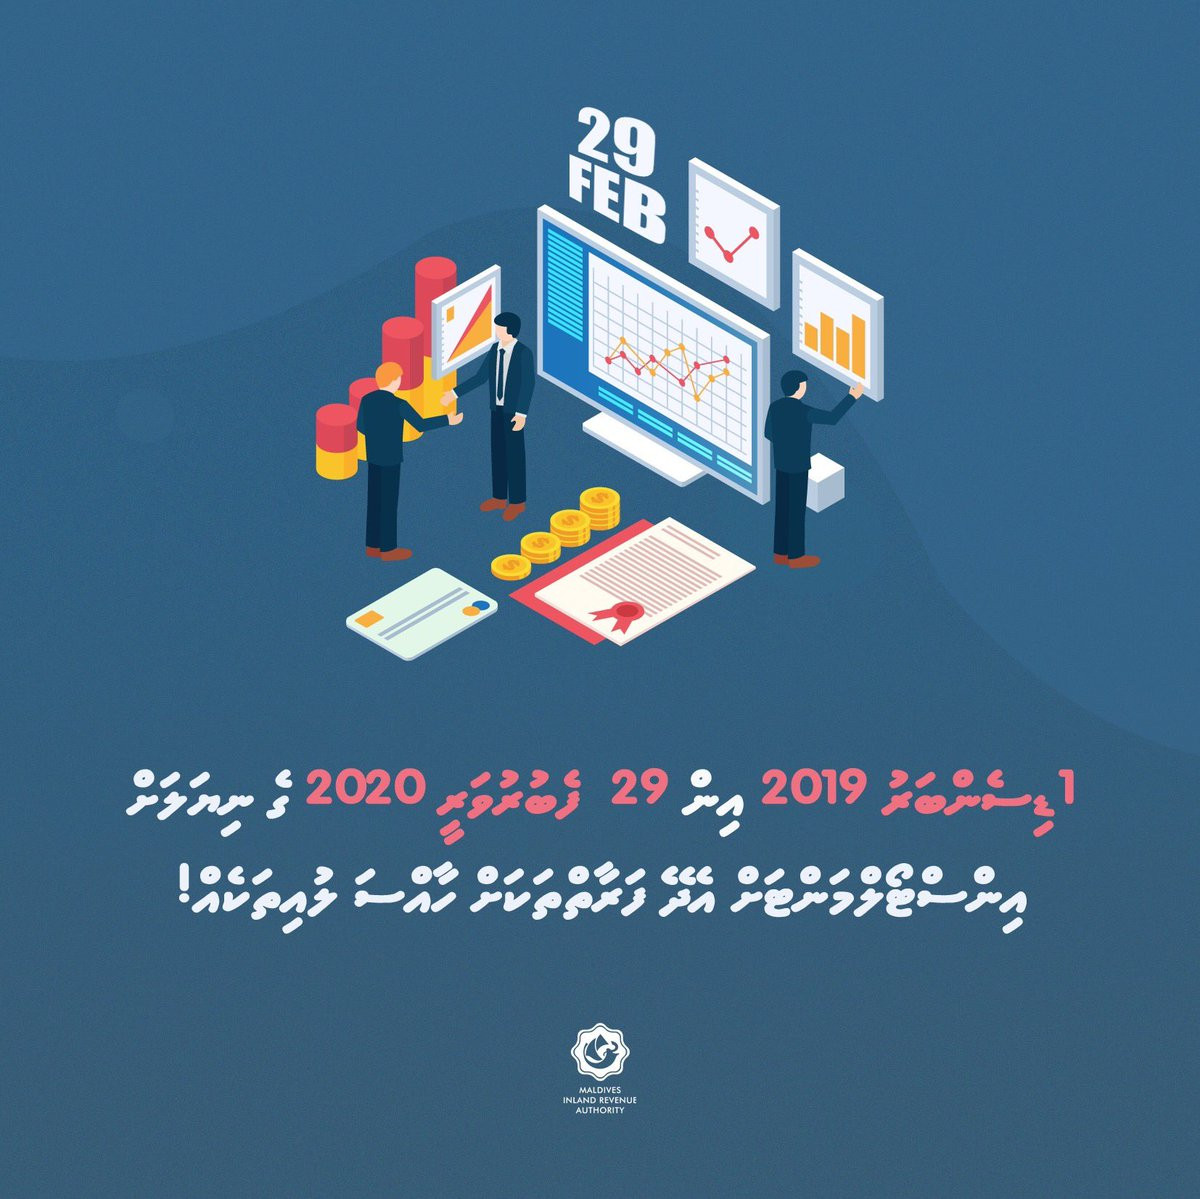 Installment Payments Made Easier in Maldives